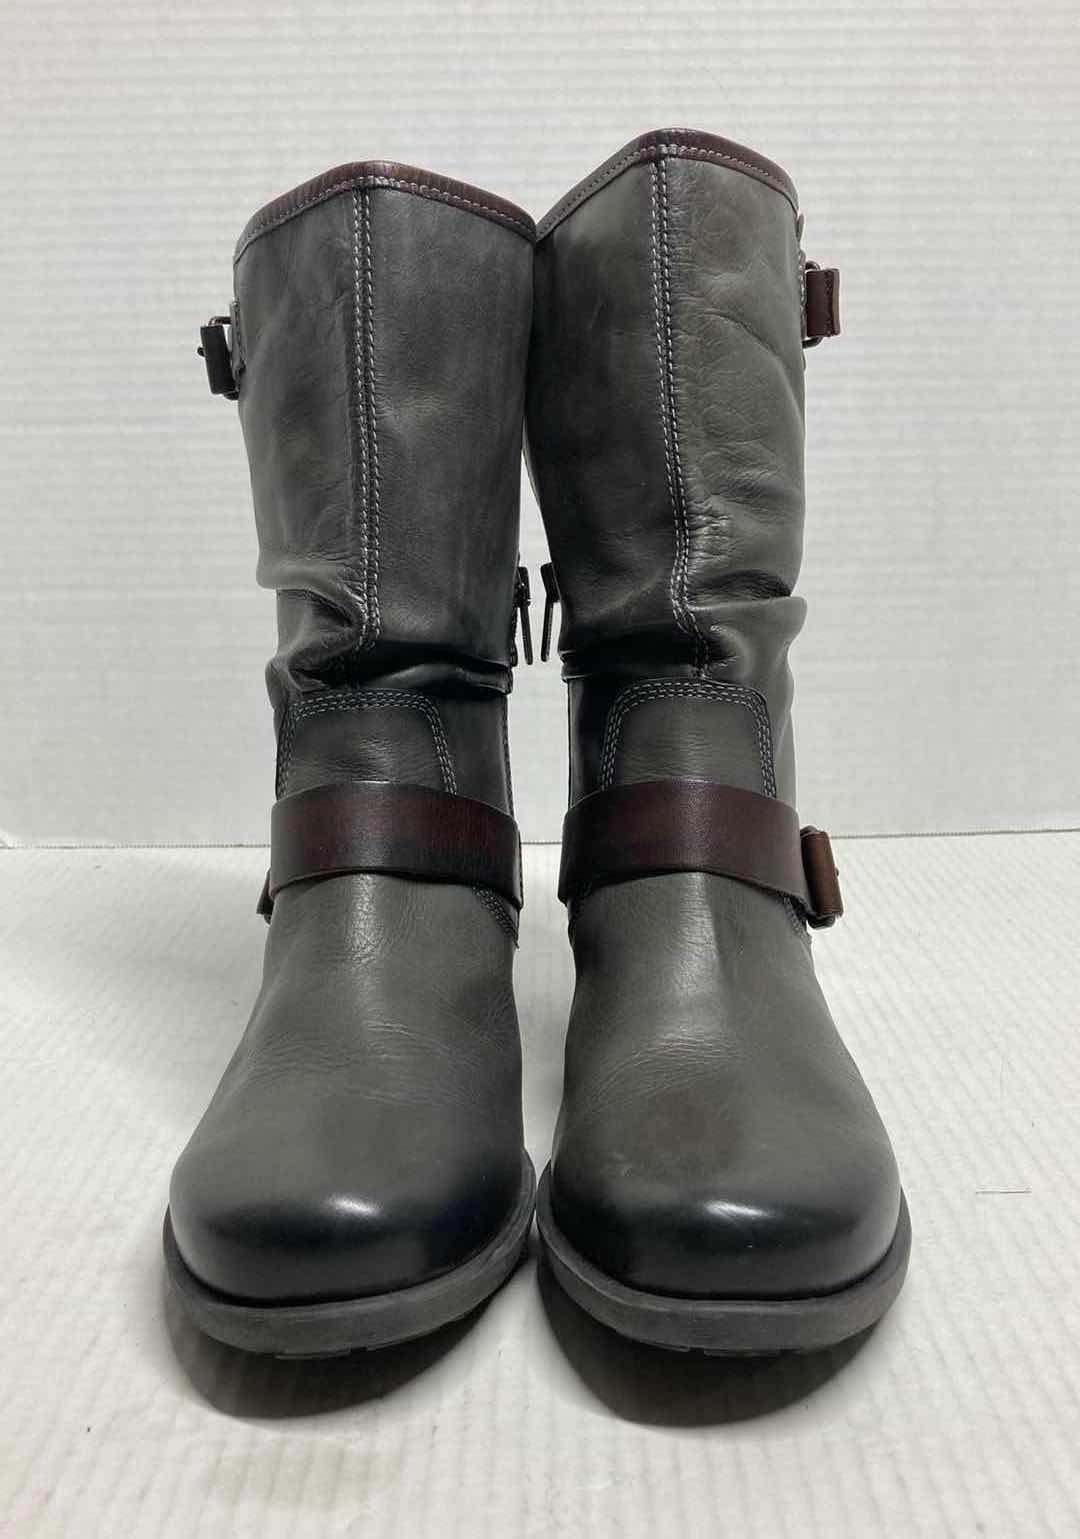 Photo 2 of PIKOLINOS DARK GREY TALL LEATHER COMBAT BOOTS W BROWN BUCKLE WOMAN’S SIZE EU 39